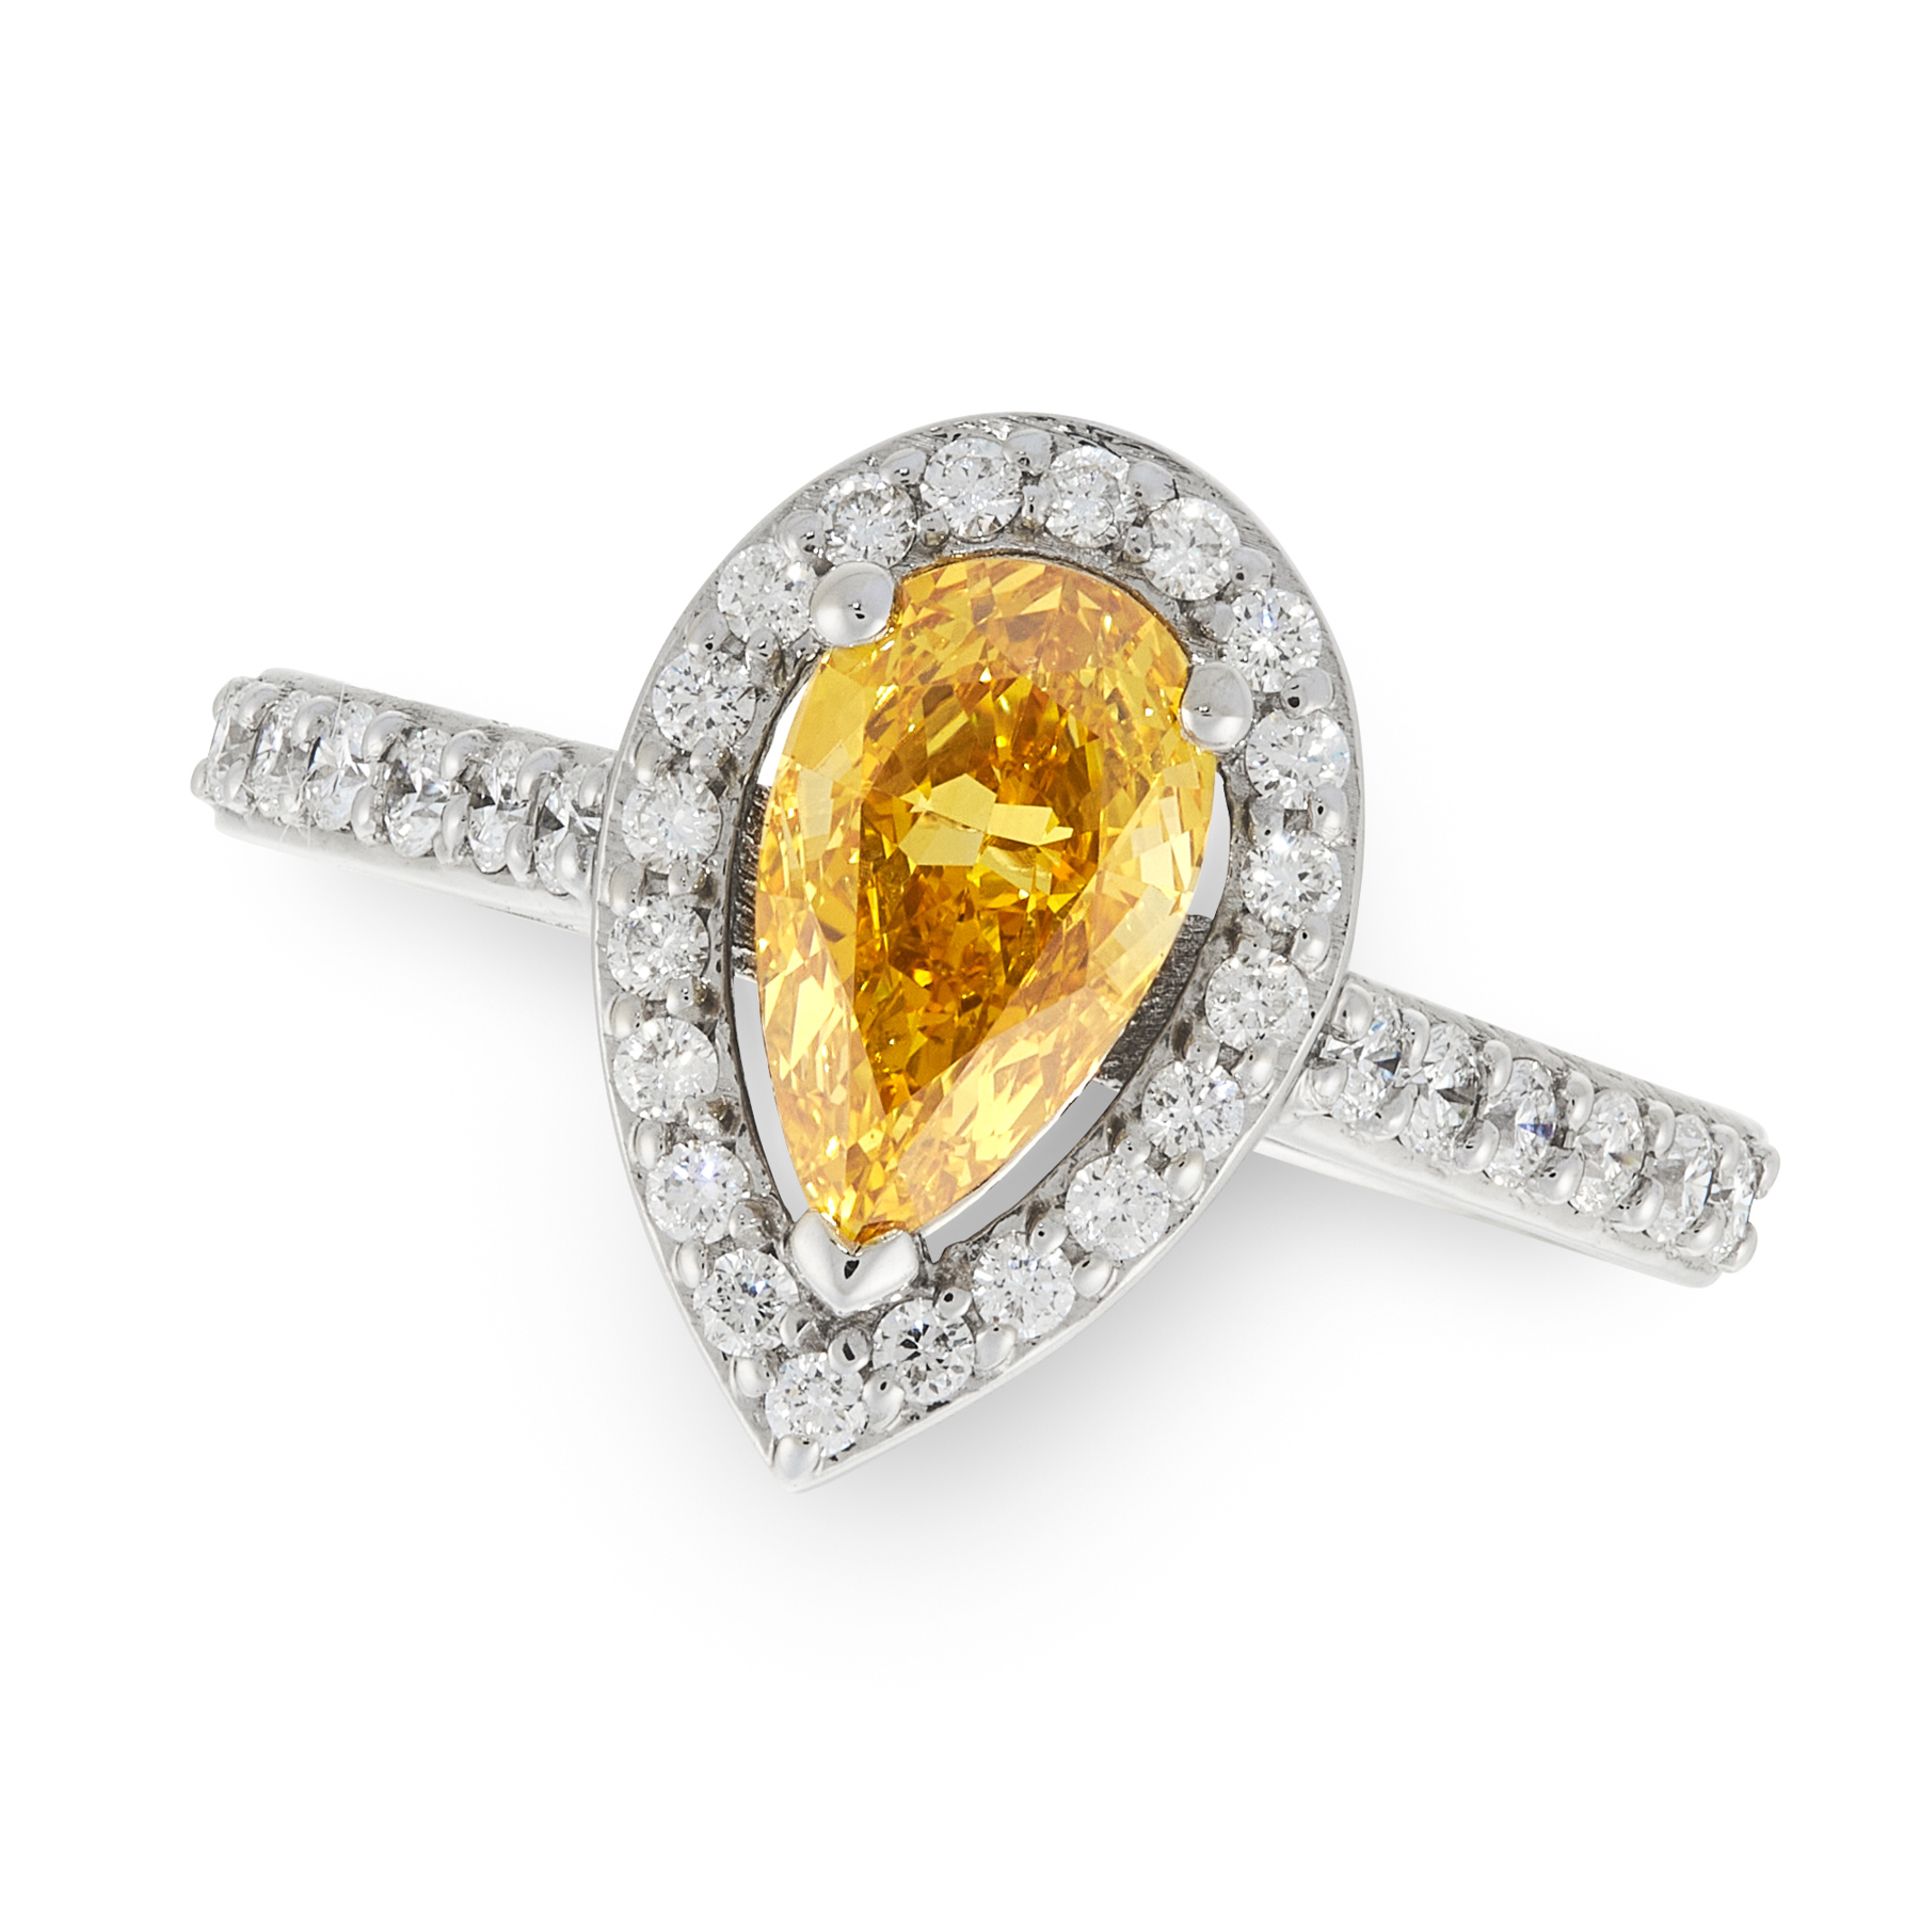 A FANCY INTENSE ORANGE-YELLOW DIAMOND AND WHITE DIAMOND RING in 18ct white gold, set with a pear